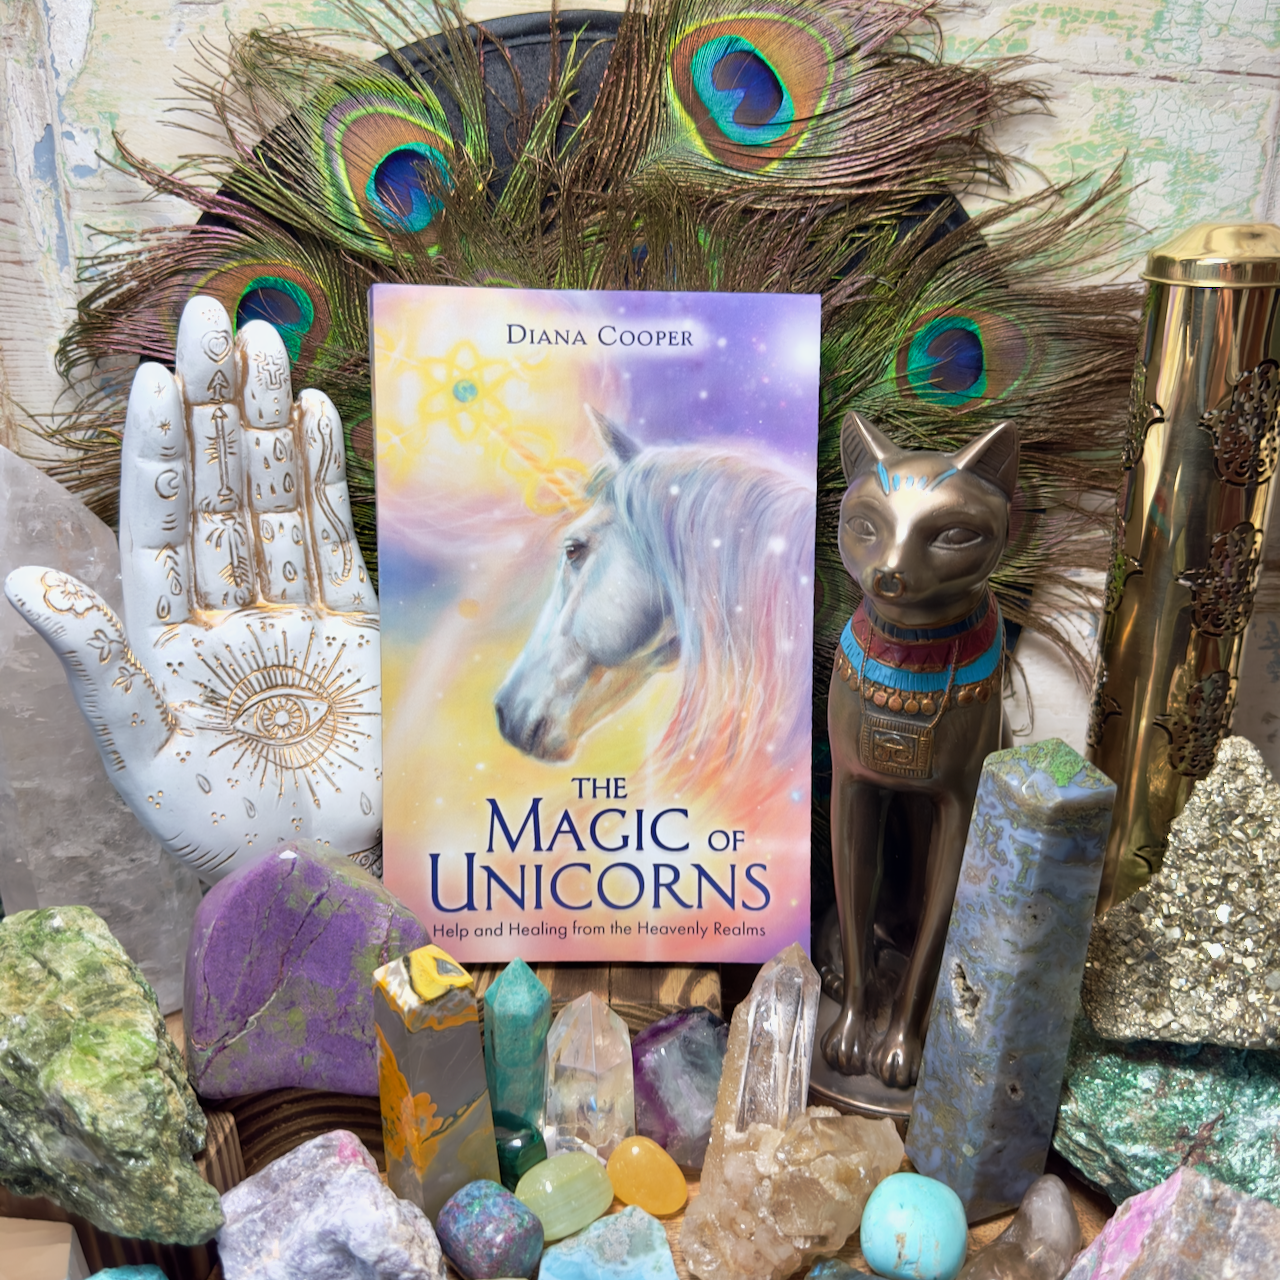 The Magic of Unicorns: Help and Healing from the Heavenly Realms